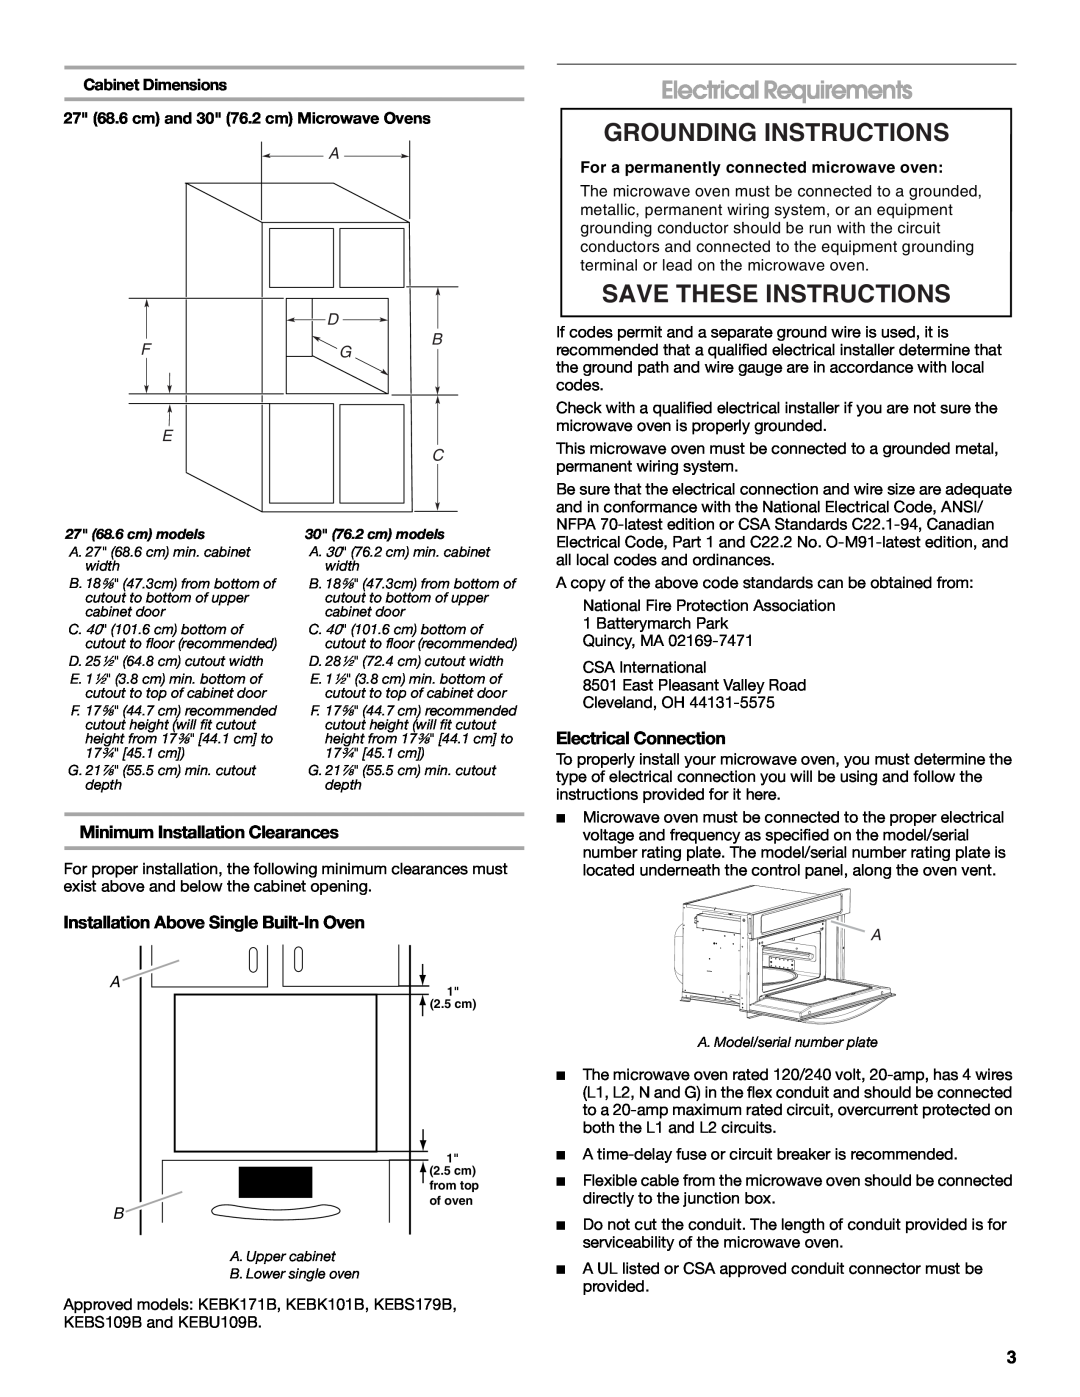 KitchenAid W10351317A Electrical Requirements, Grounding Instructions, Save These Instructions, Electrical Connection 